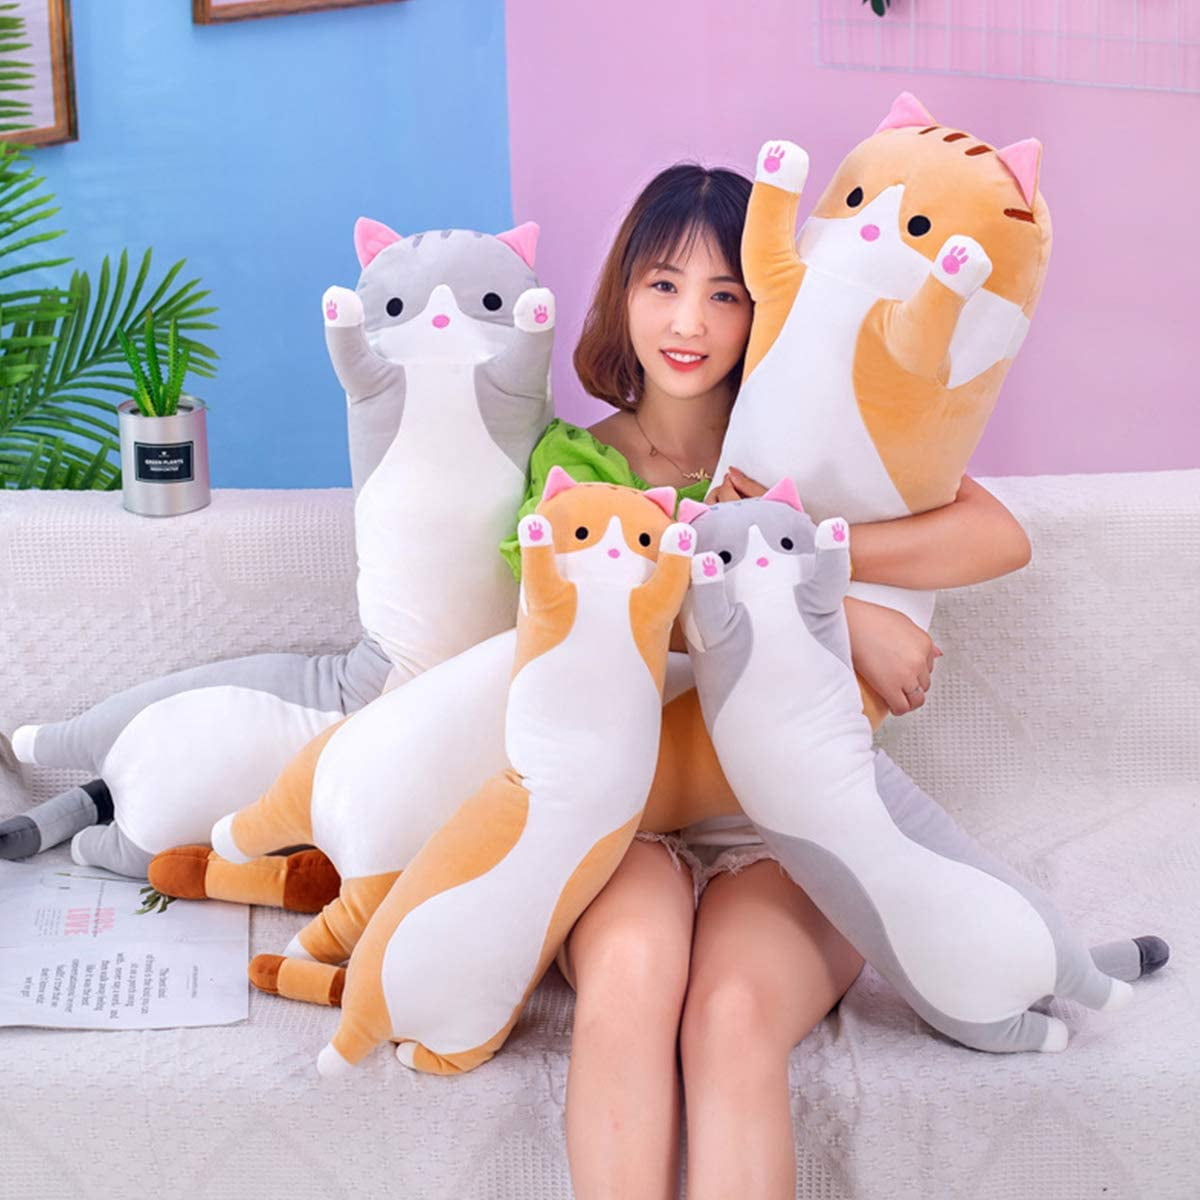 Ohyoulive Cute Plush Cat Doll Soft Stuffed Kitten Pillow Doll Toy Gift for Kids Girlfriend Creative New Long Cat Plush Toy Pillow Cute Doll Ragdoll Gift Sofa Supplies Soft and Good Breathability 